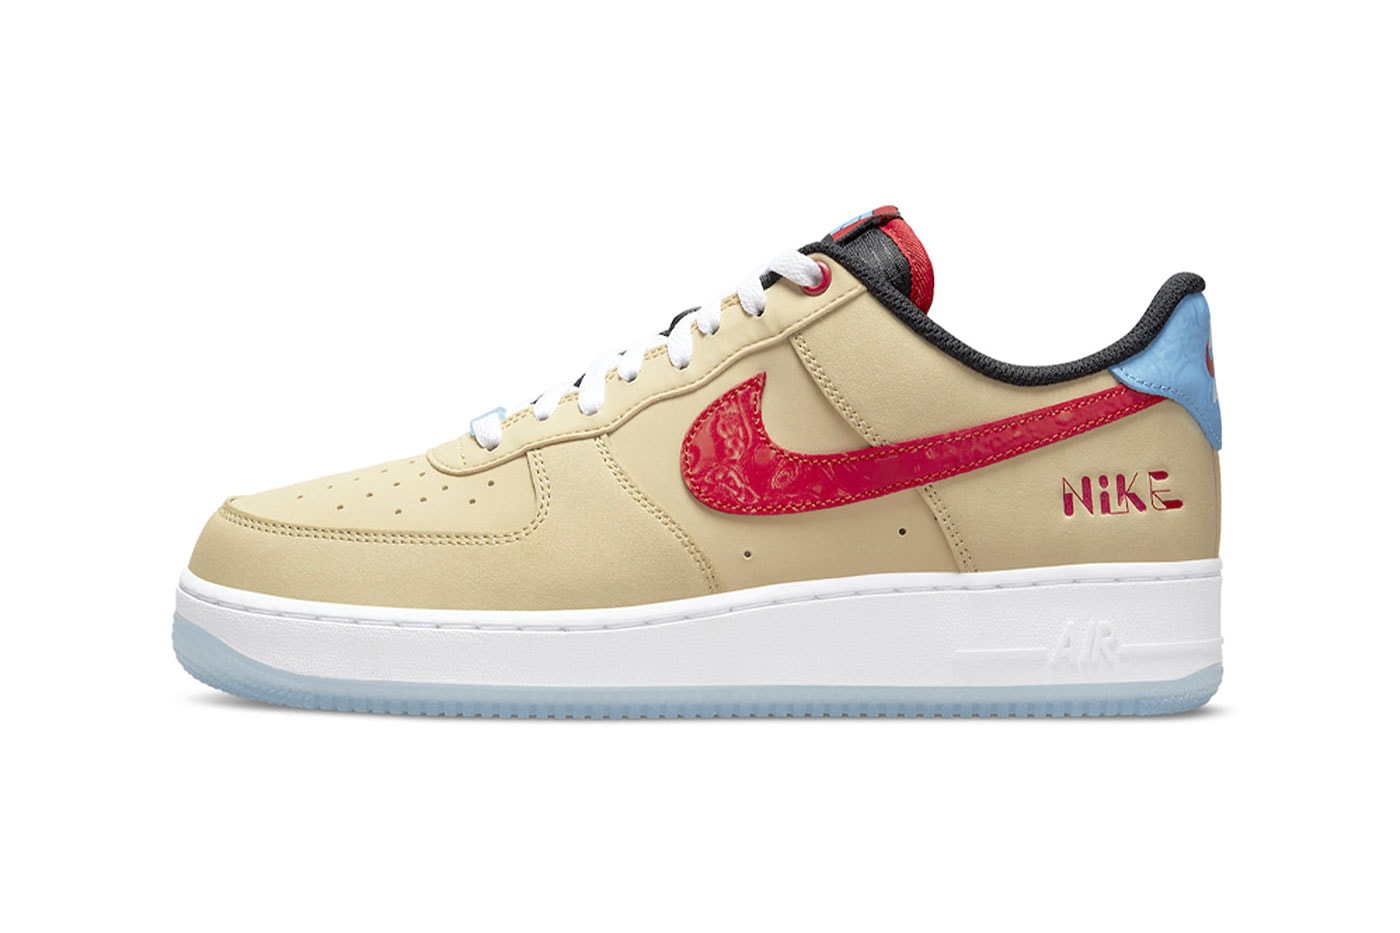 The Nike Air Force 1 Joins the 'Worldwide' Collection - Sneaker Freaker